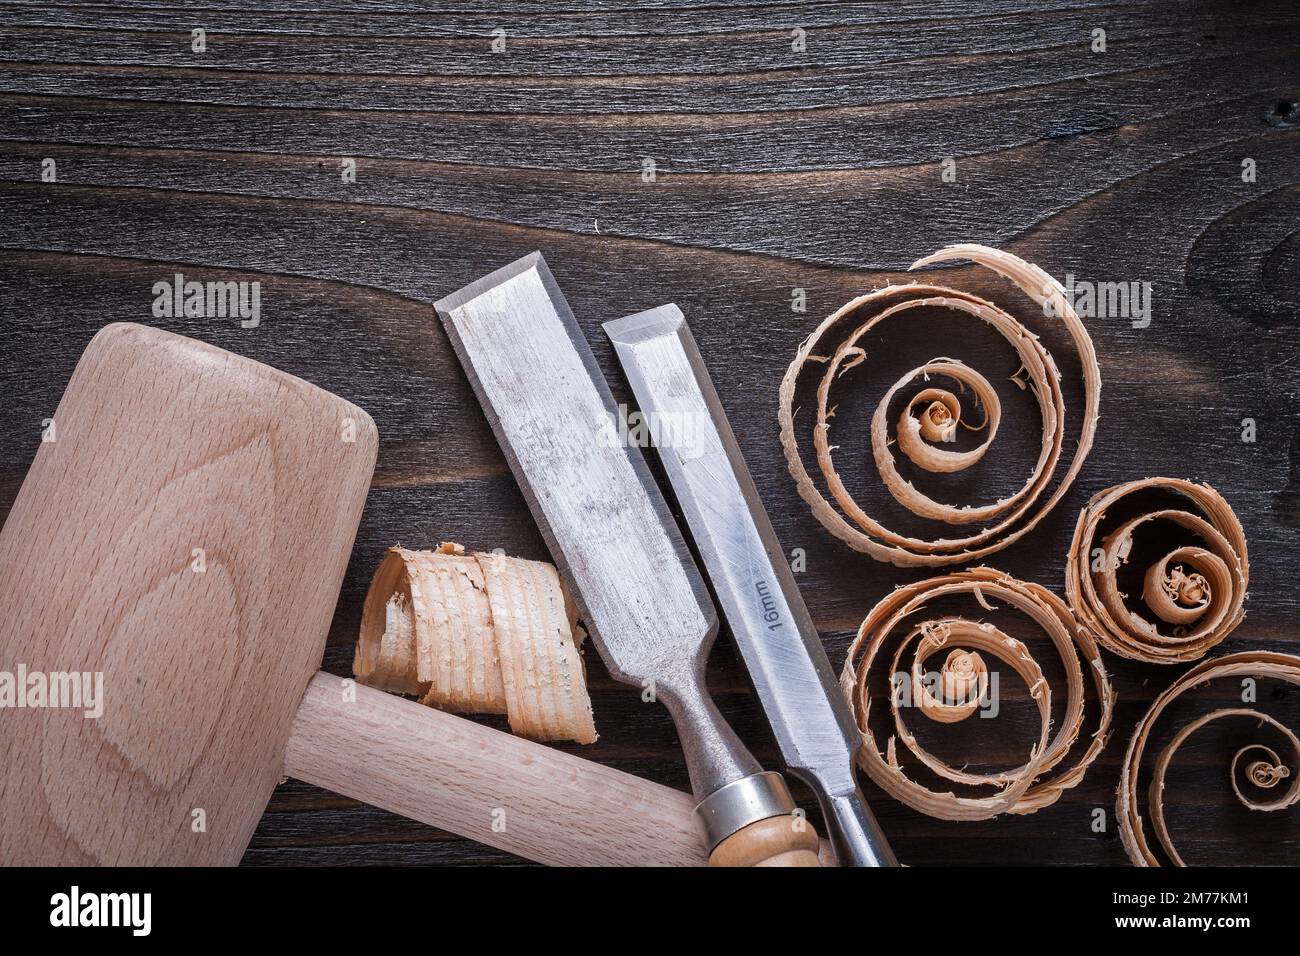 Wooden mallet chisels and curled up planing chips on vintage wood board construction concept. Stock Photo